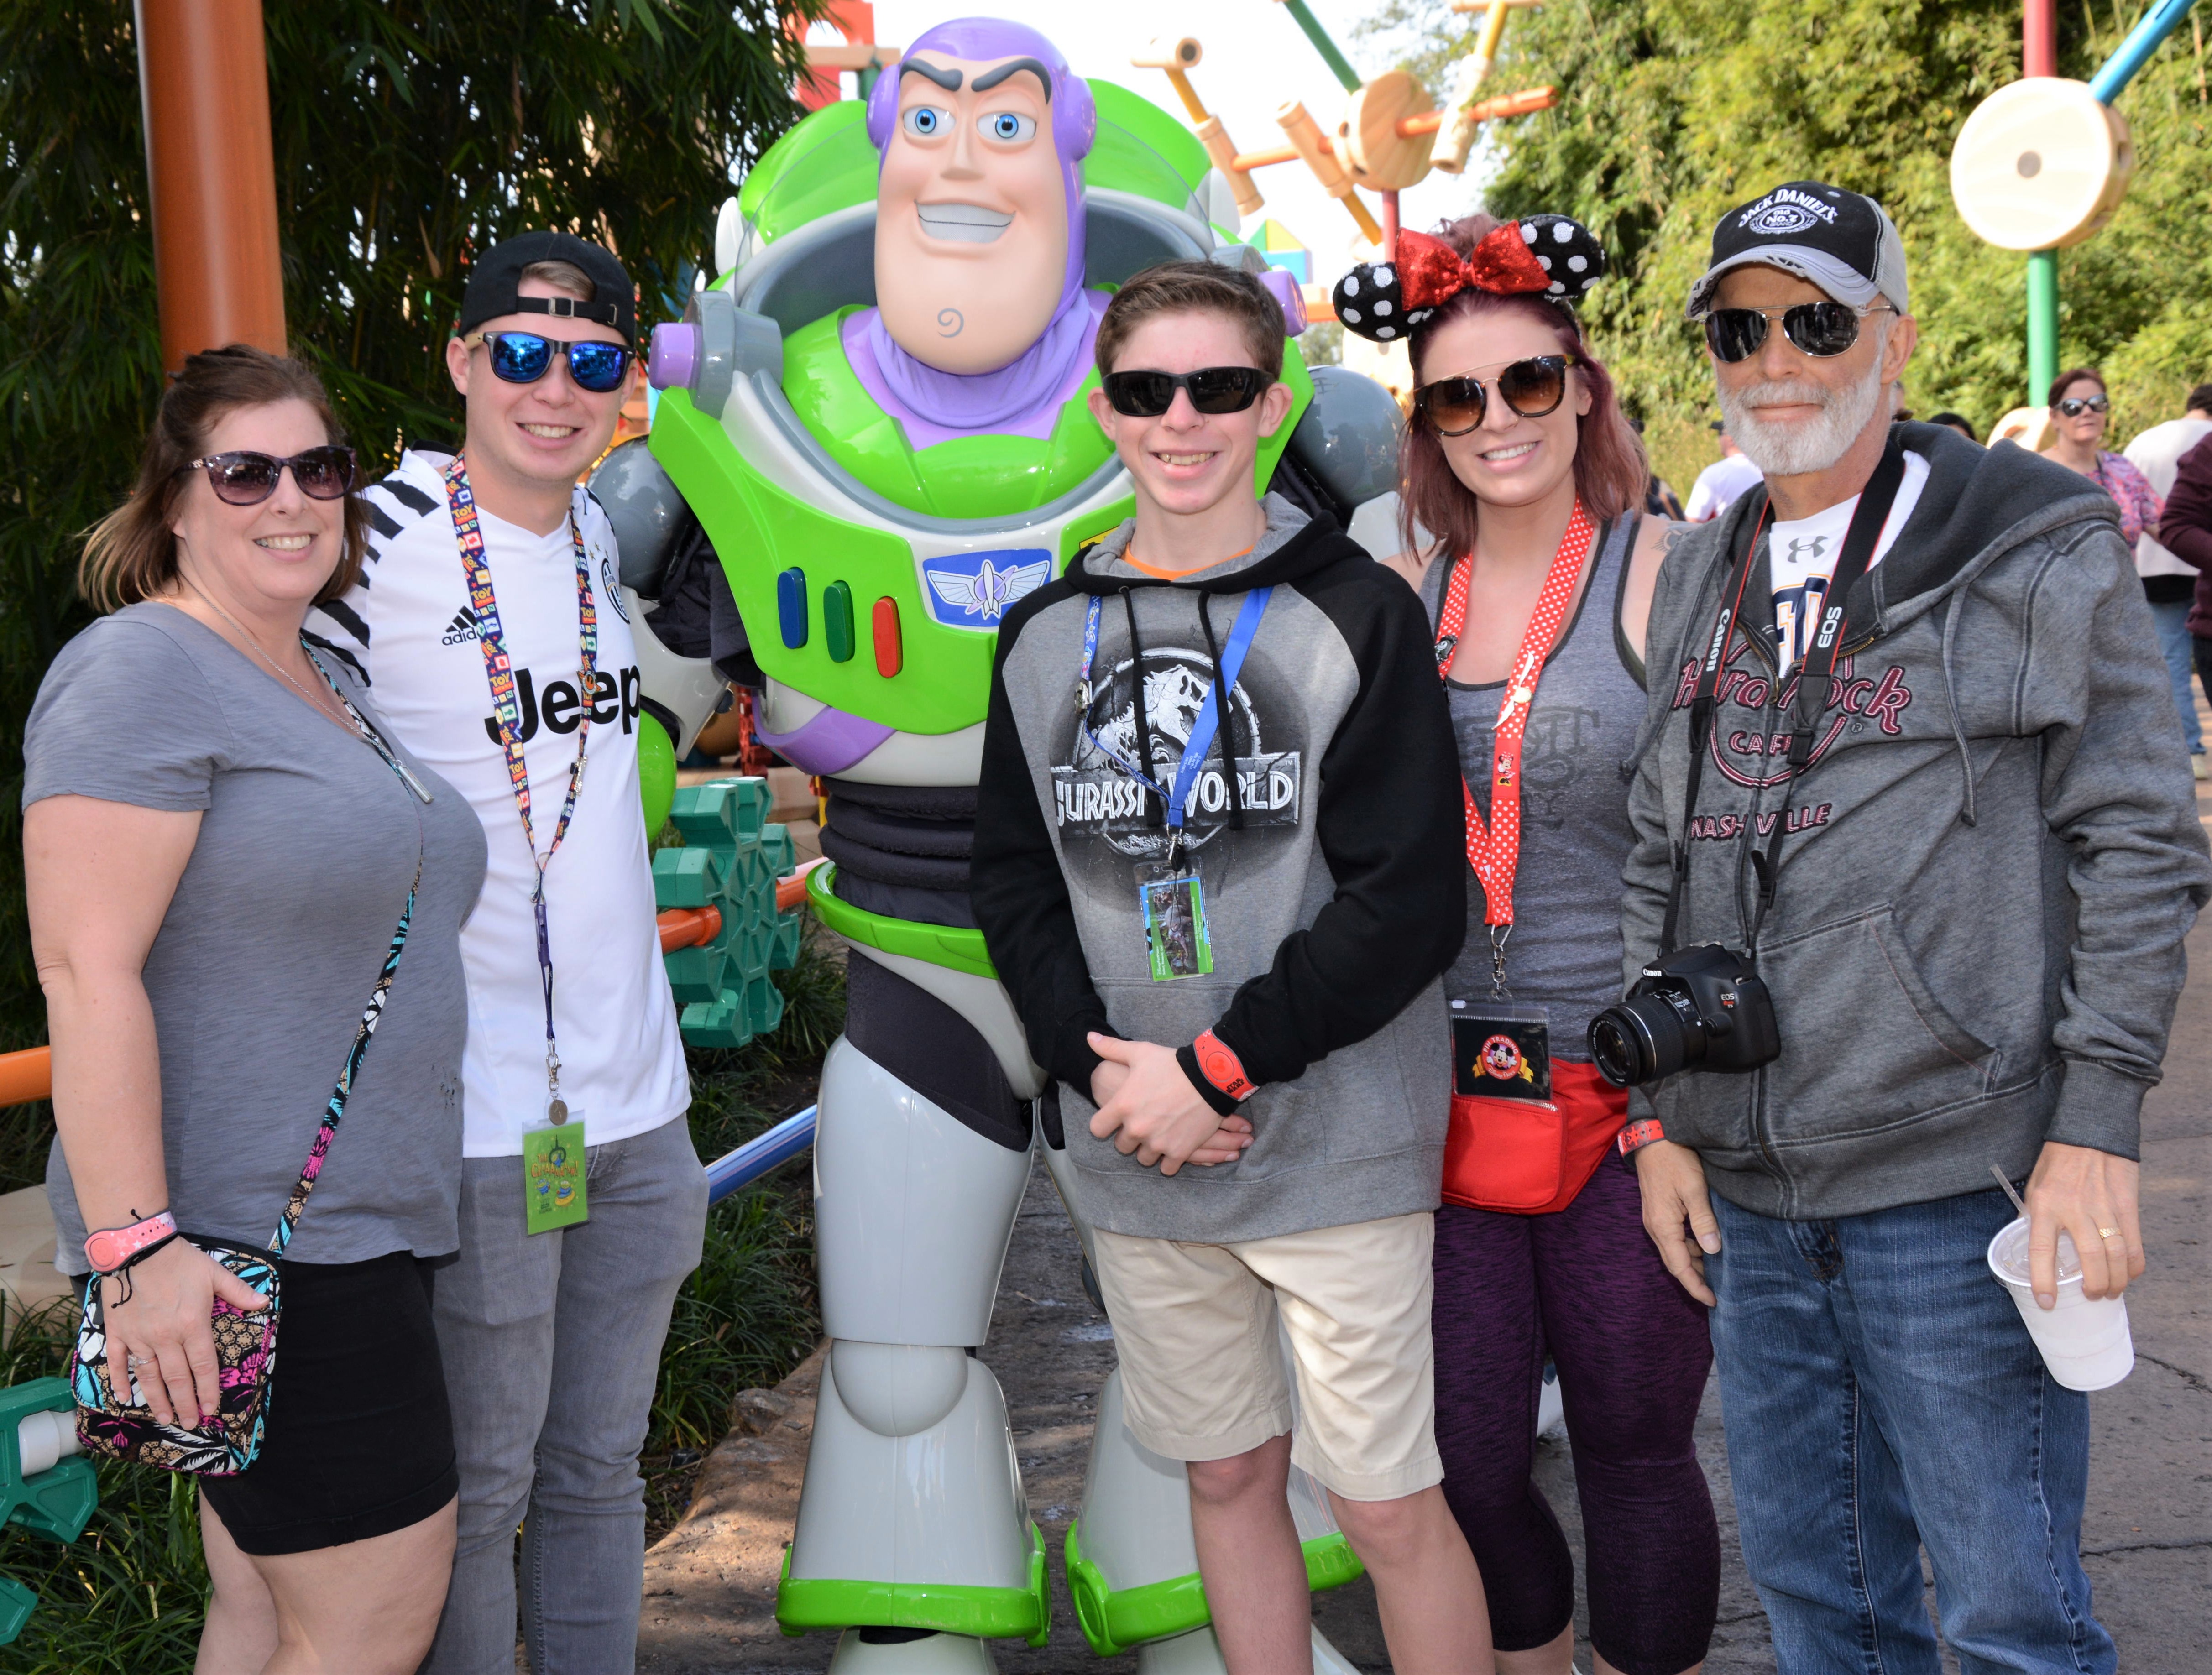 The Terrian family – Teresa (from left), Dylan, Carson, Baillie and Mark – visited Disney World and Universal Studios in Orlando, Florida earlier this month. Photo provided.